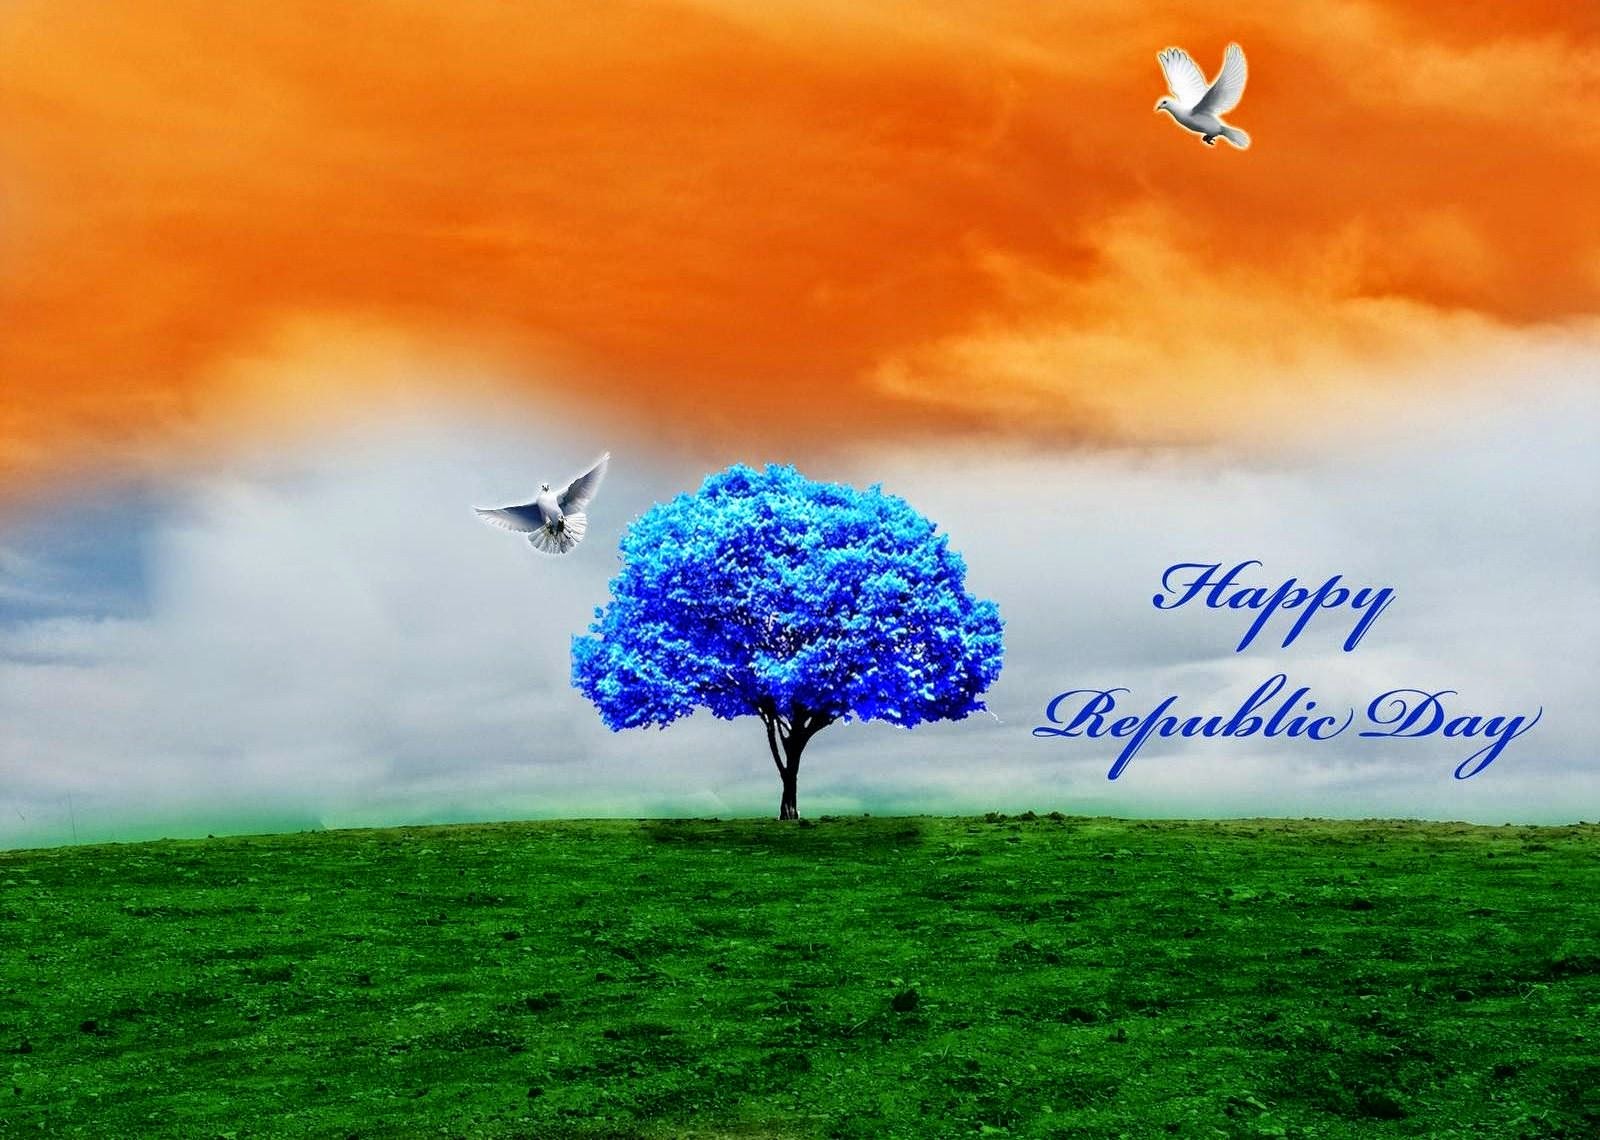 Short essay on republic day of india for kids